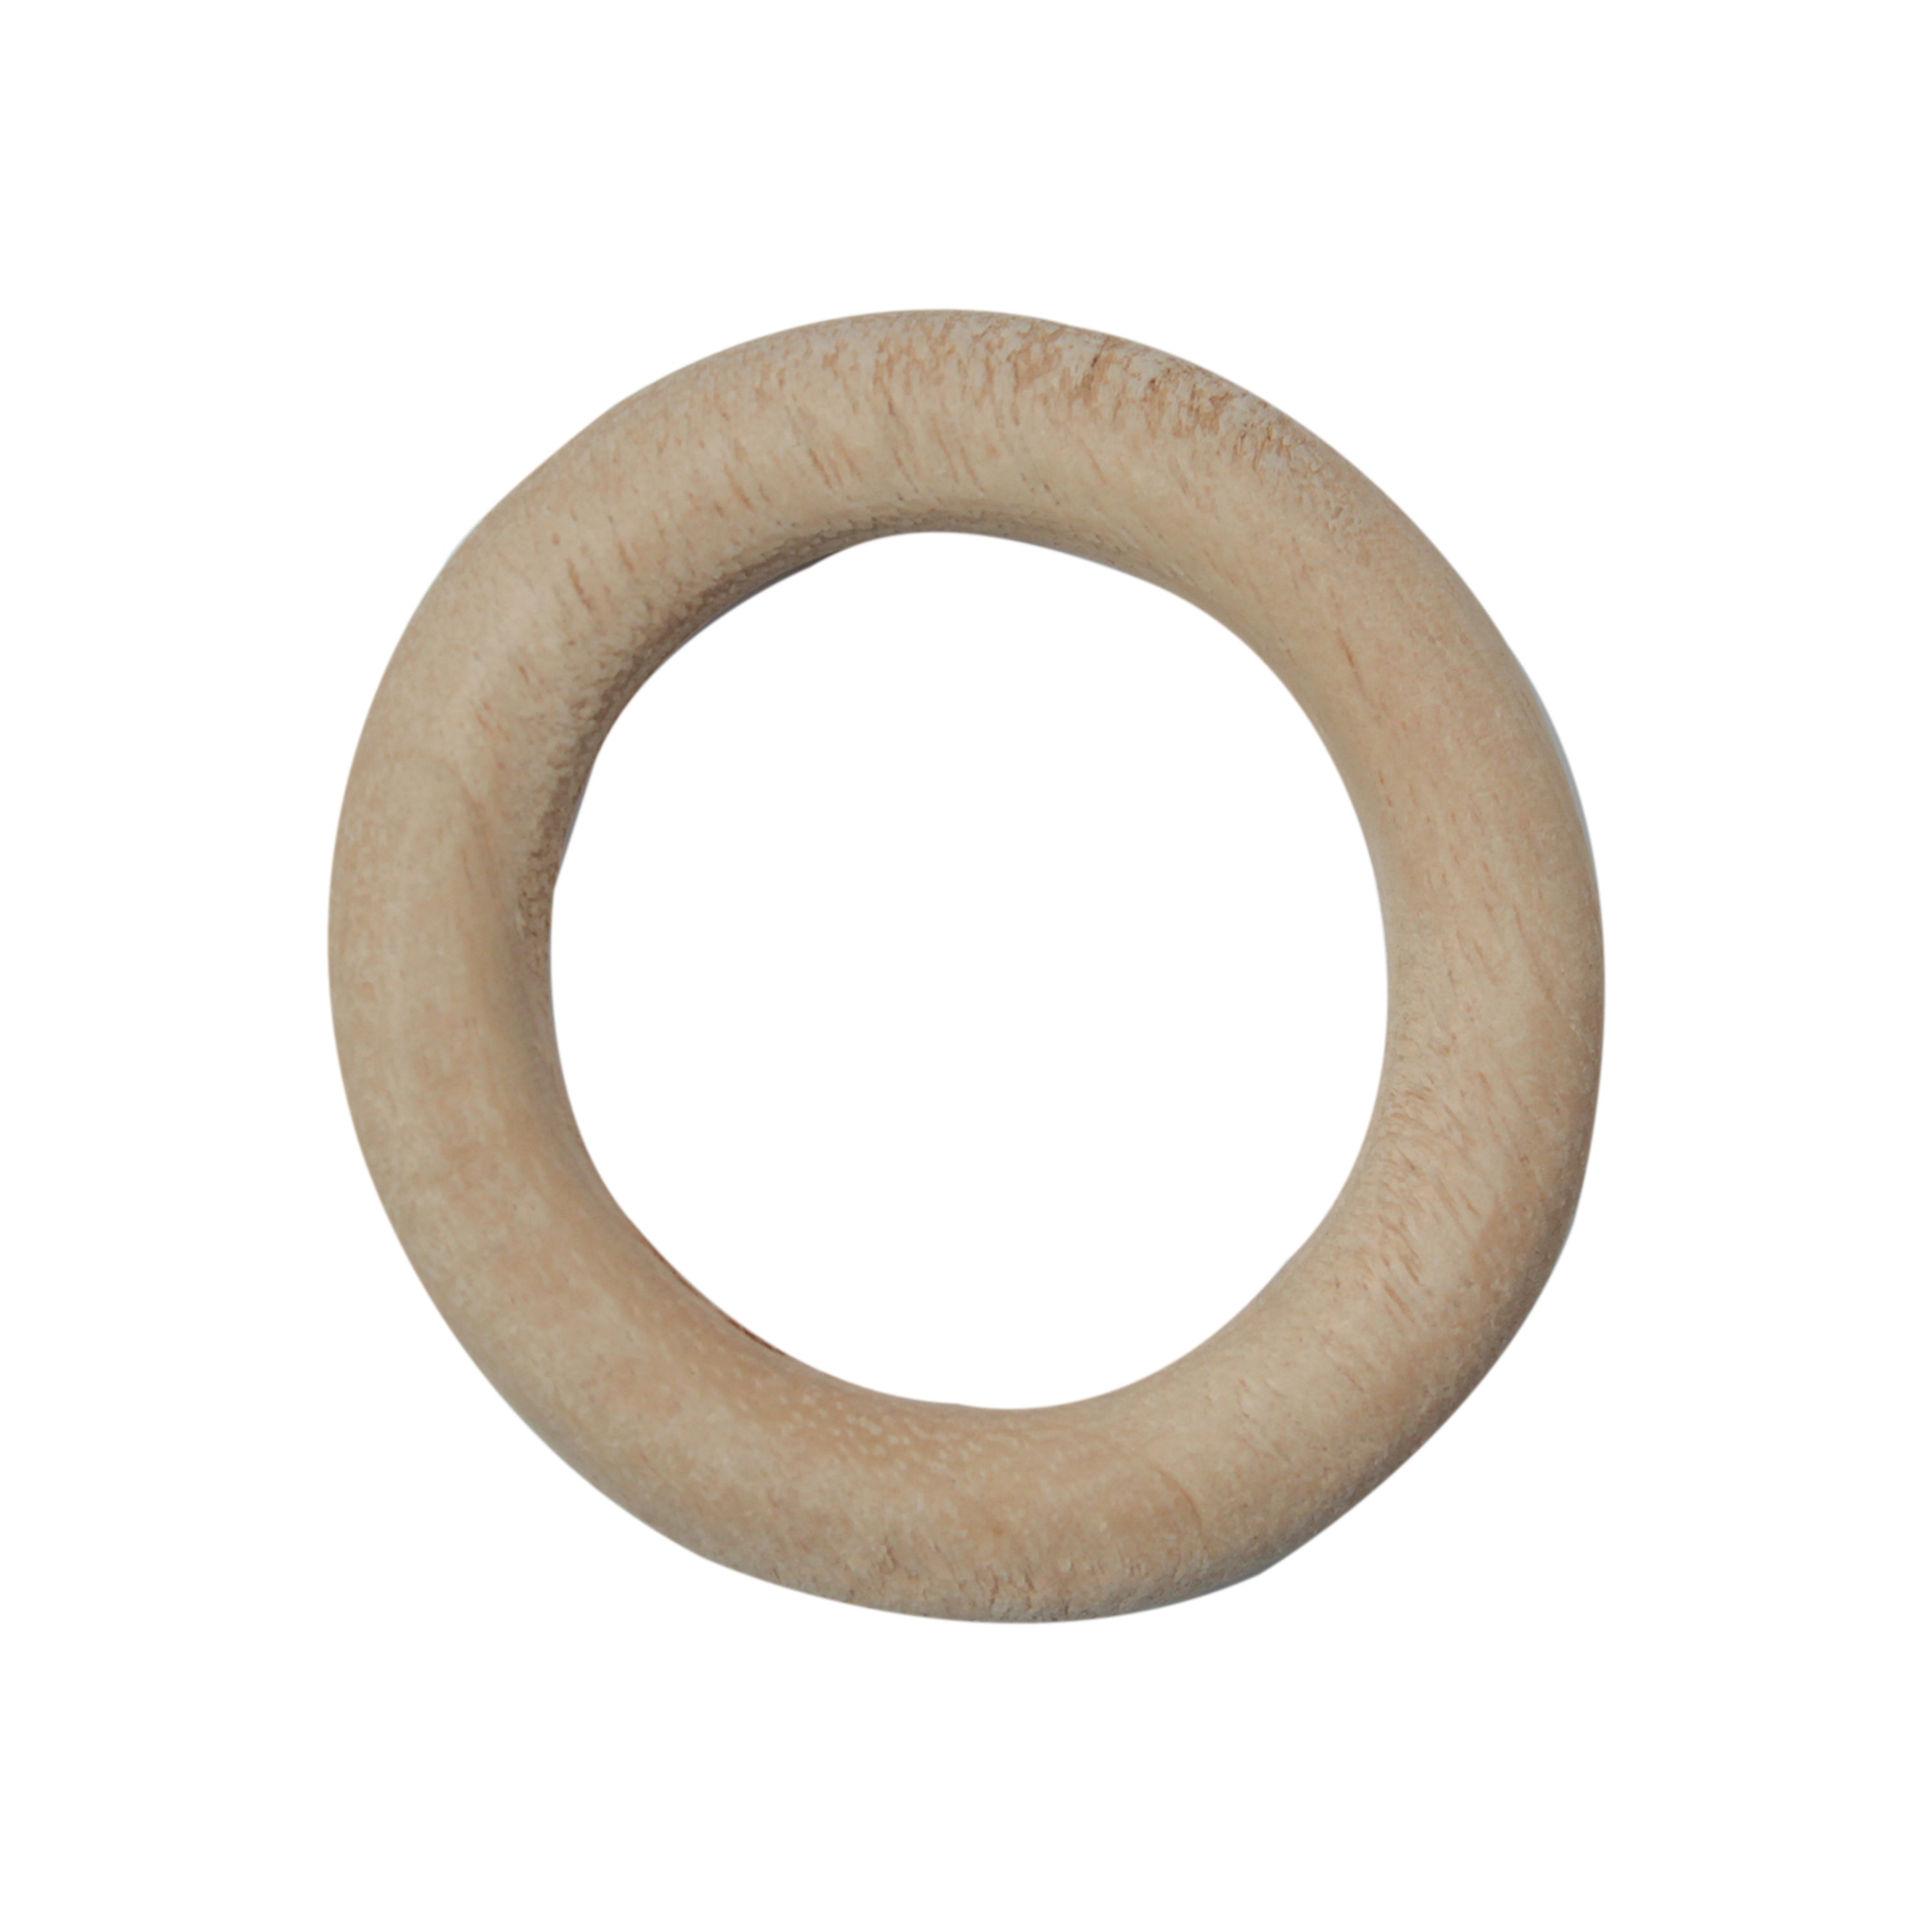 Crafted wooden rings